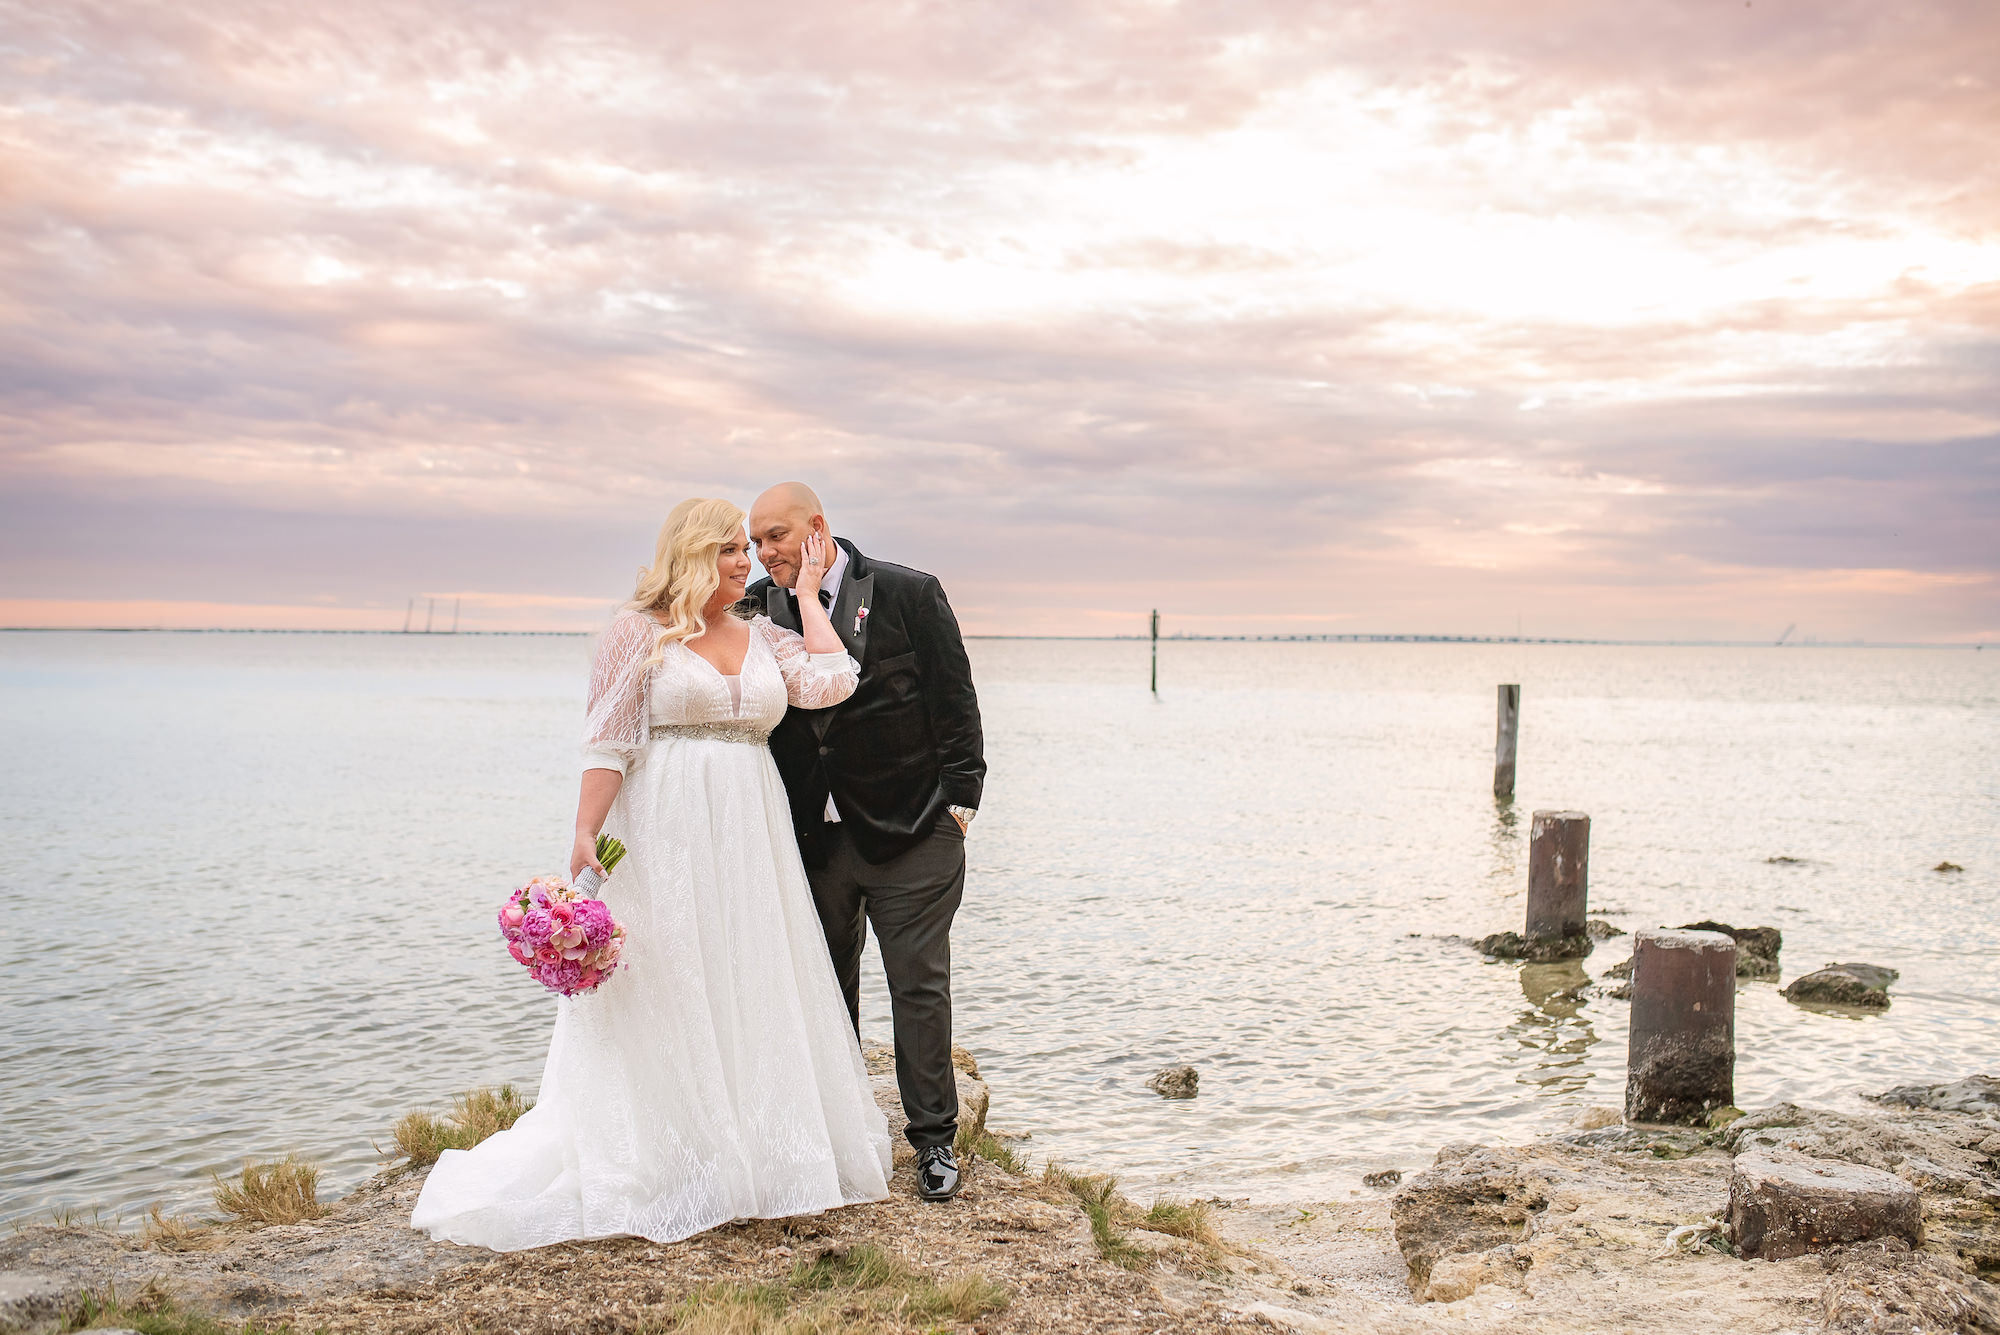 Groom and Bride in Long Sleeve Wedding Ballgown and Pink Bouquet by the Waters Wedding Portrait | Florida Photographer Kristen Marie Photography